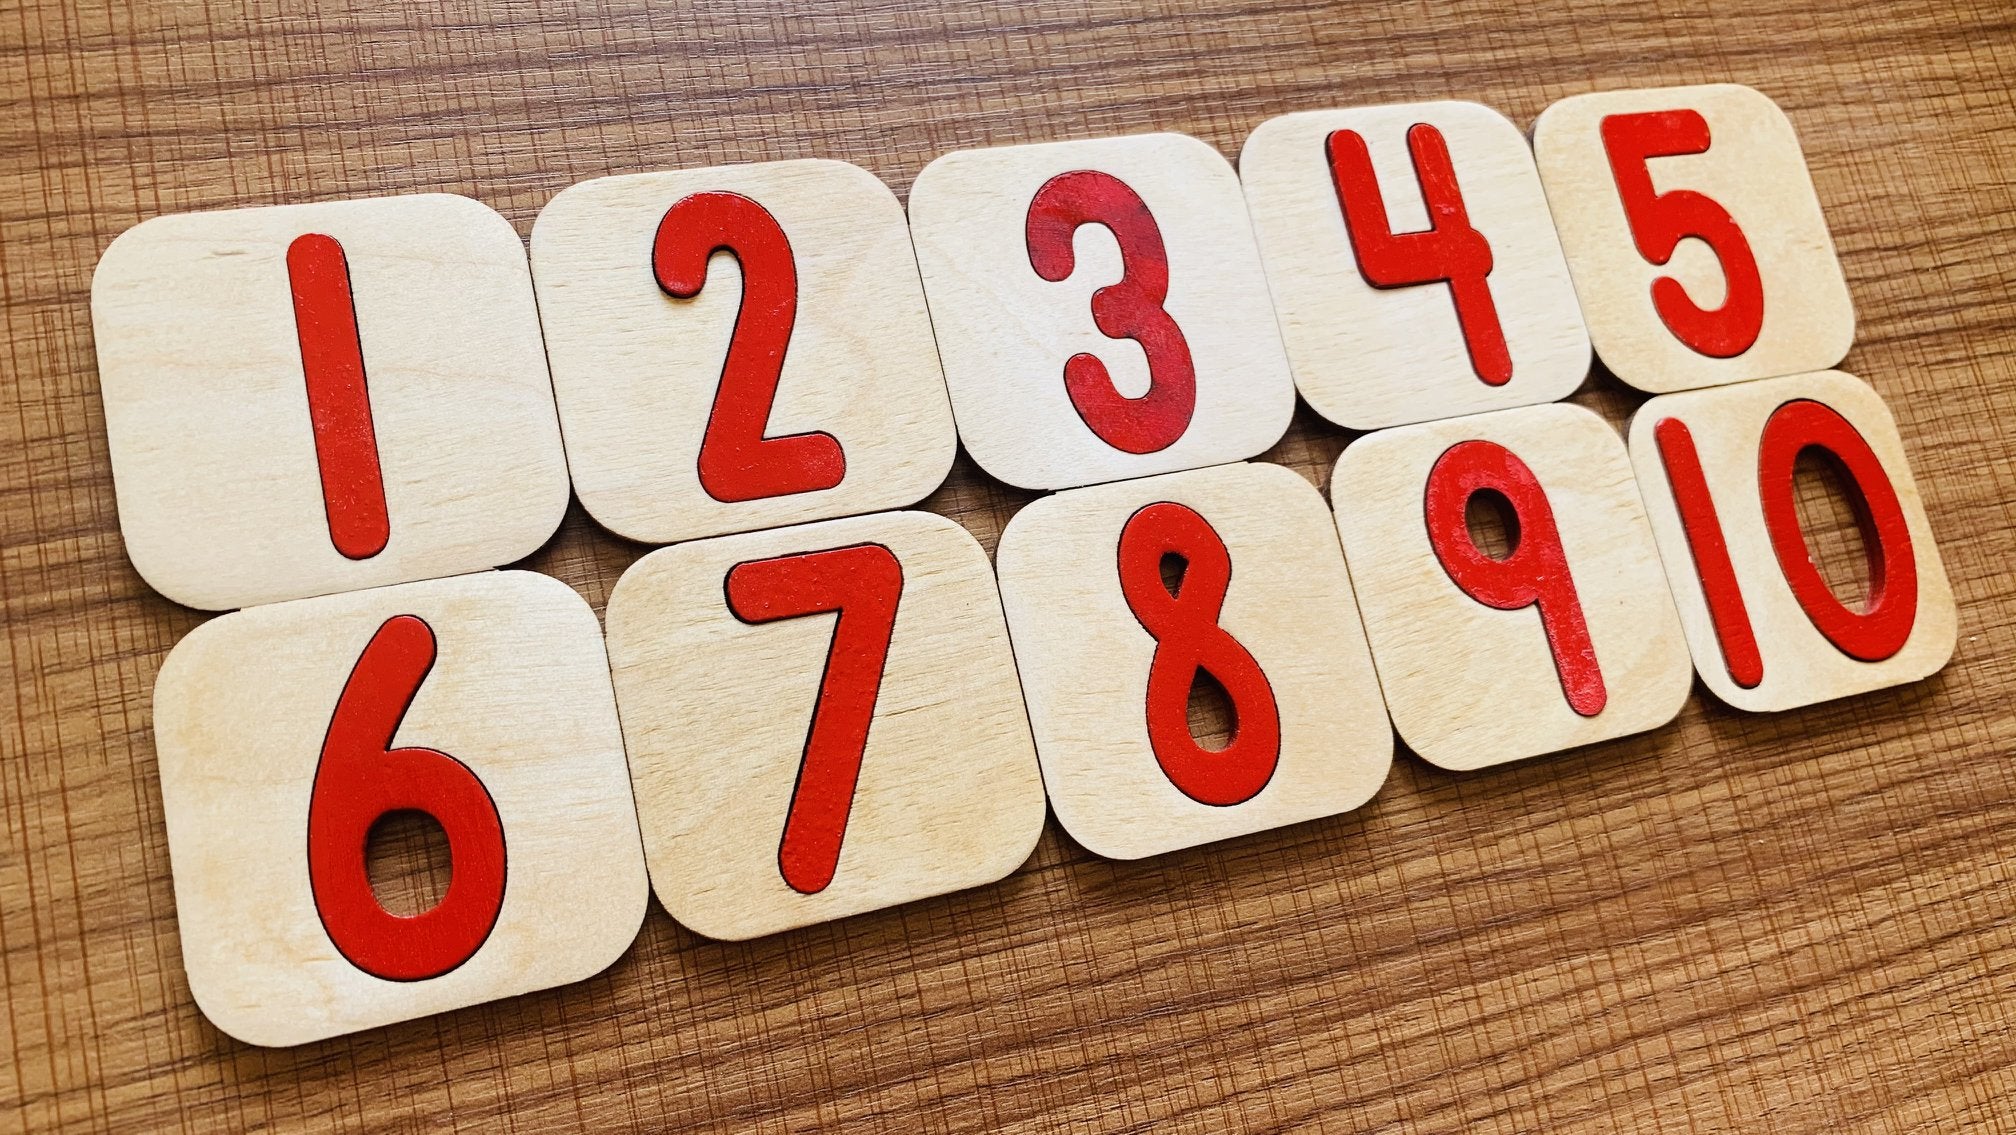 Numbers puzzle (1-10) in English